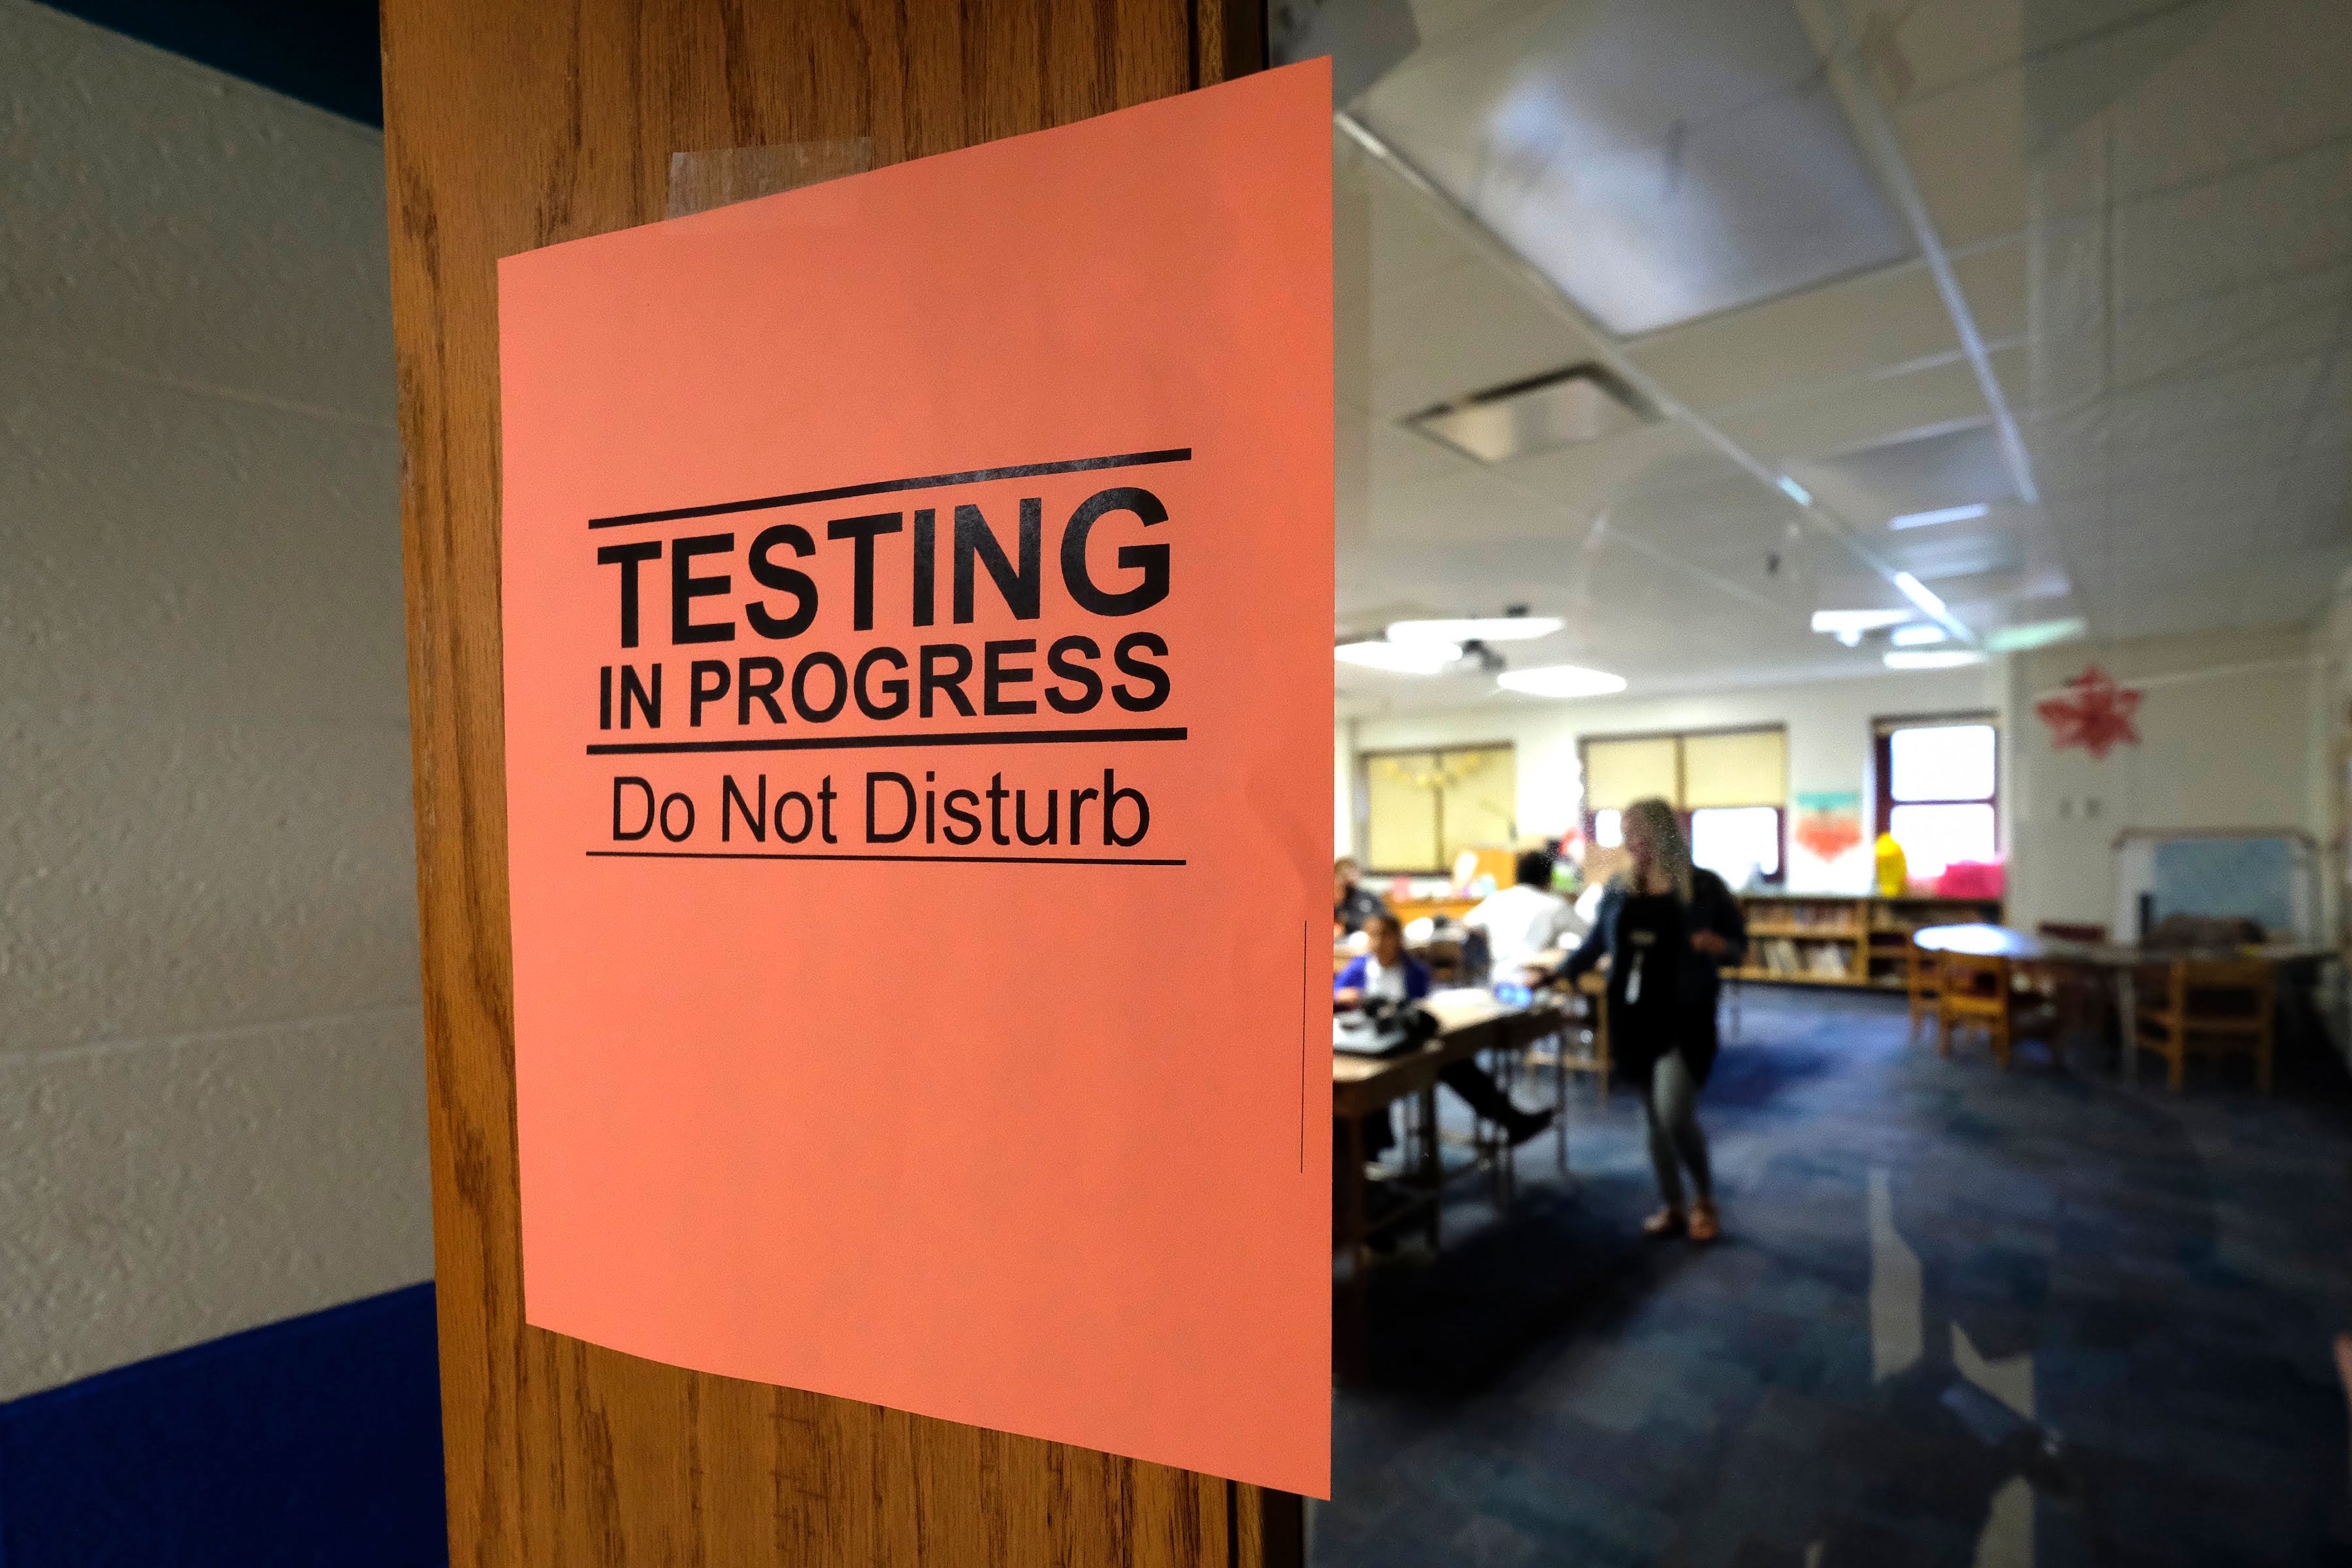 An orange sign says “testing in progress, do not disturb” as students work in the background.